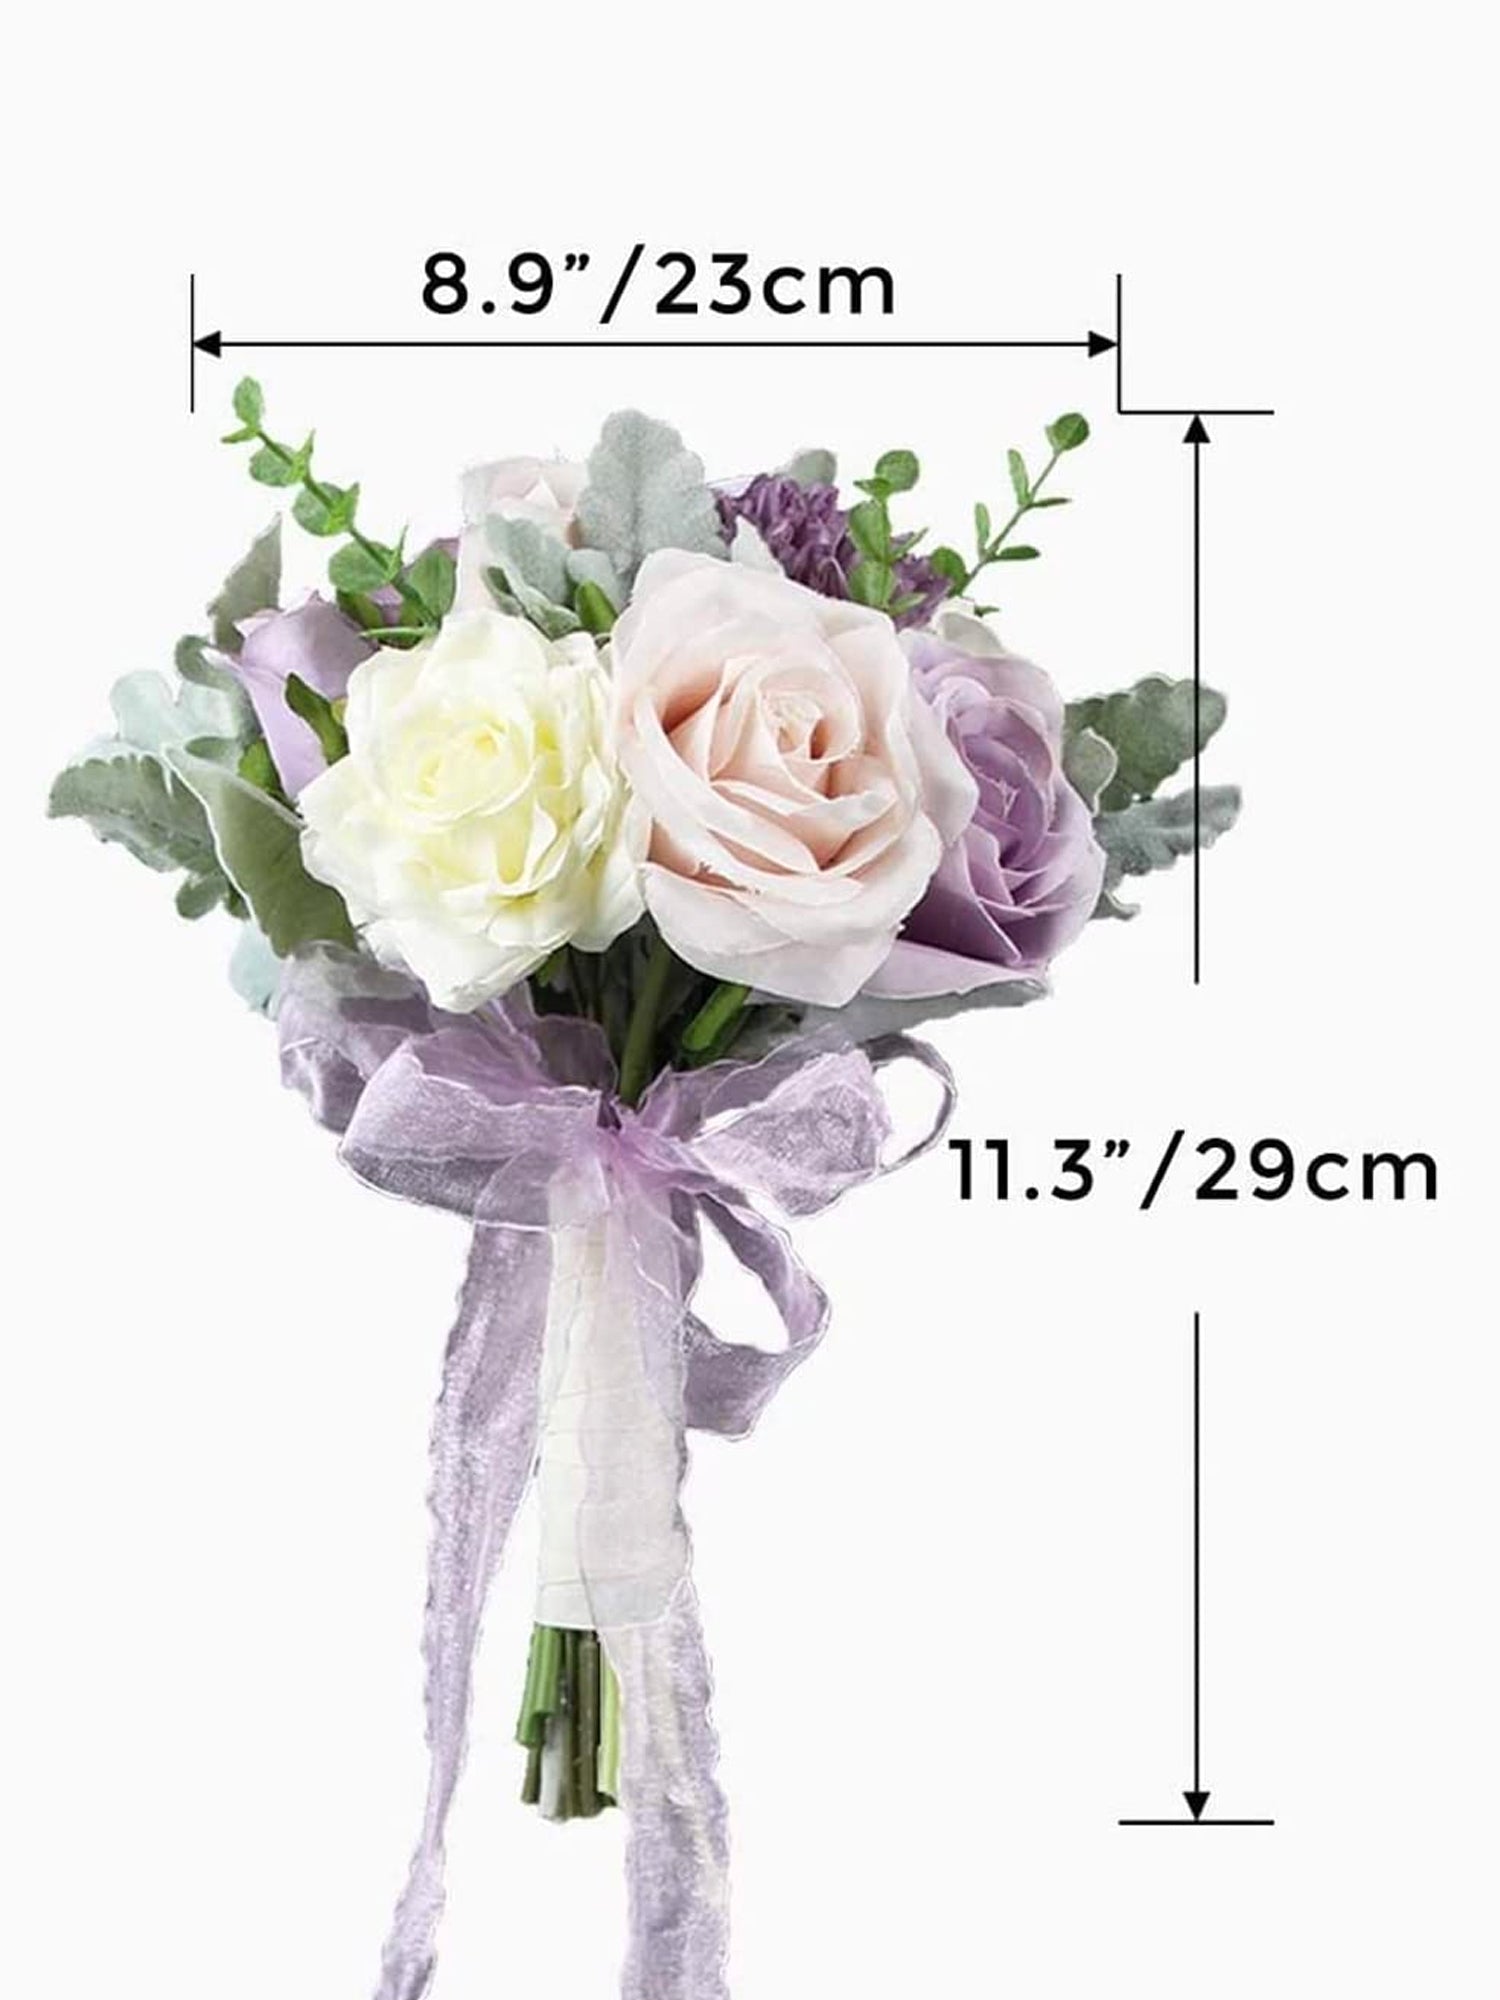 8.9 inch wide Pastel Purple Rounded Bridal Bouquet